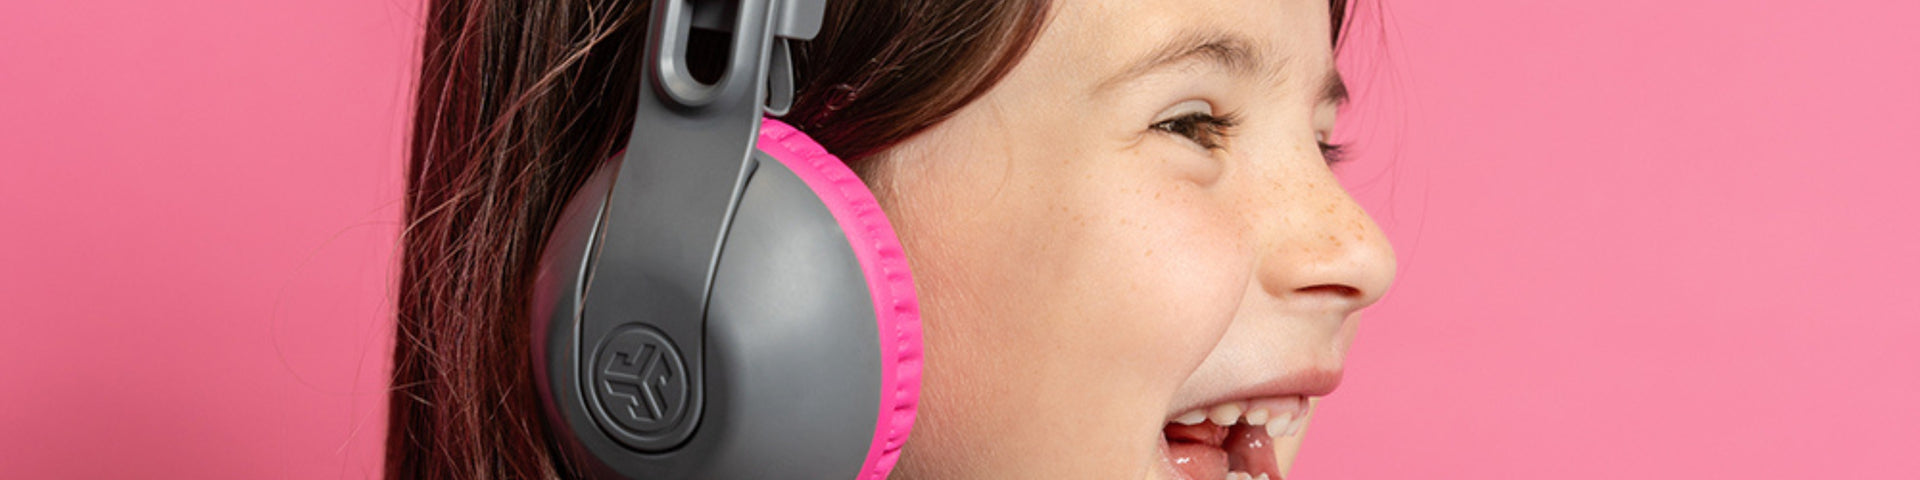 Healthy Listening While Learning: The Importance of Volume-Safe Sound for Kids